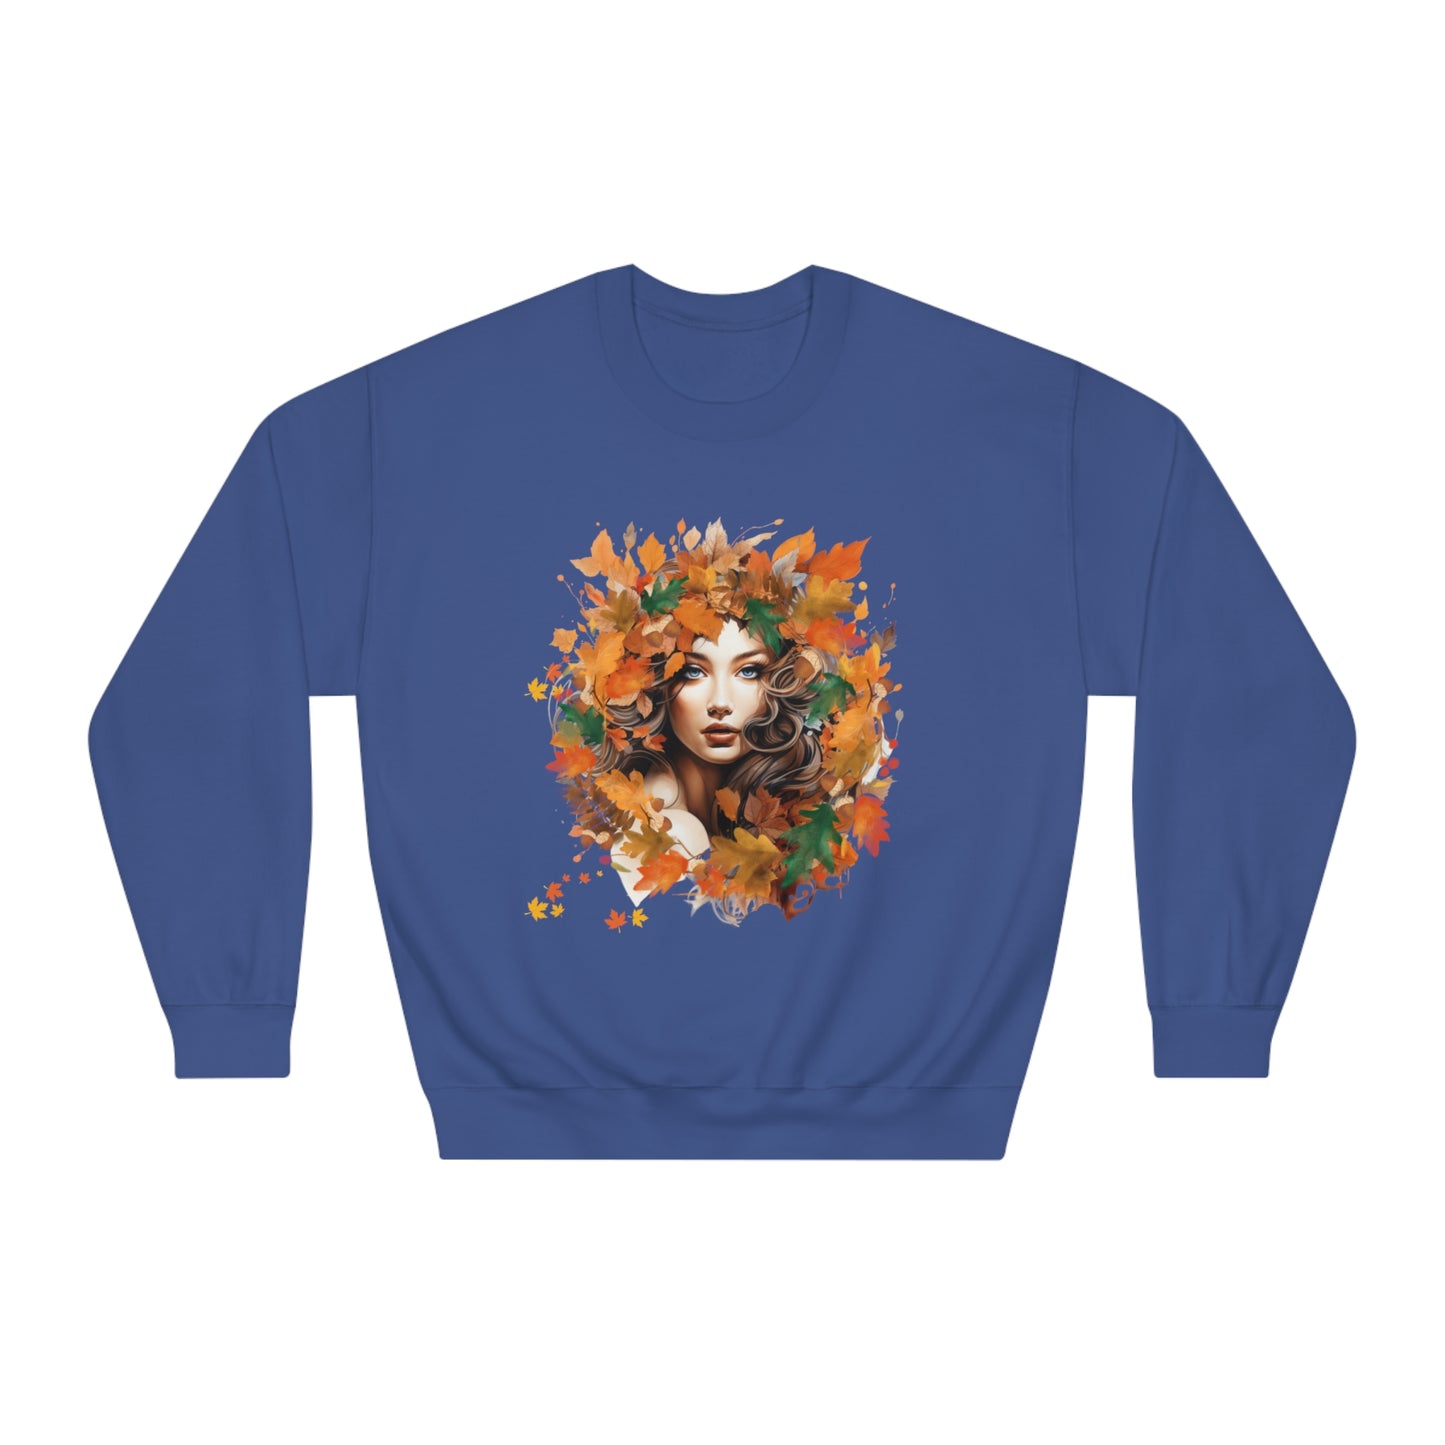 Whimsical Dreams in Autumn Hues: Romantic Dreamy Female Surrounded by Autumn Leaves Sweatshirt - Fairycore, Forestcore, Cottagecore-inspired Fashion Sweatshirt Navy S 